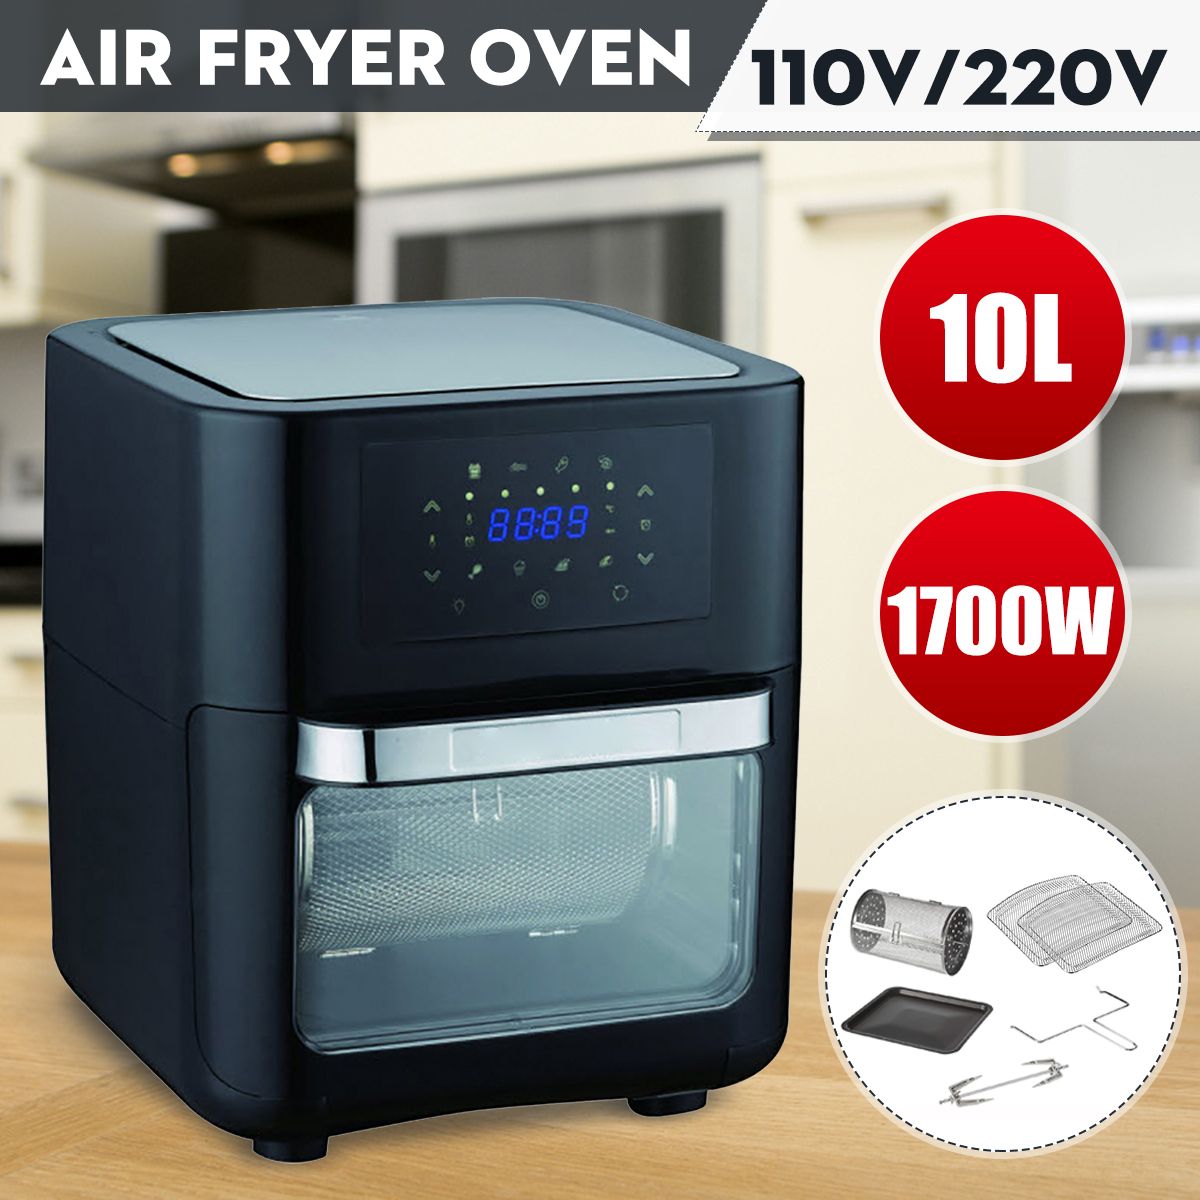 10L-1700W-110V-Multi-function-Air-Fryer-Oven-Stainless-Cooking-Food-Fried-Chicke-1682205